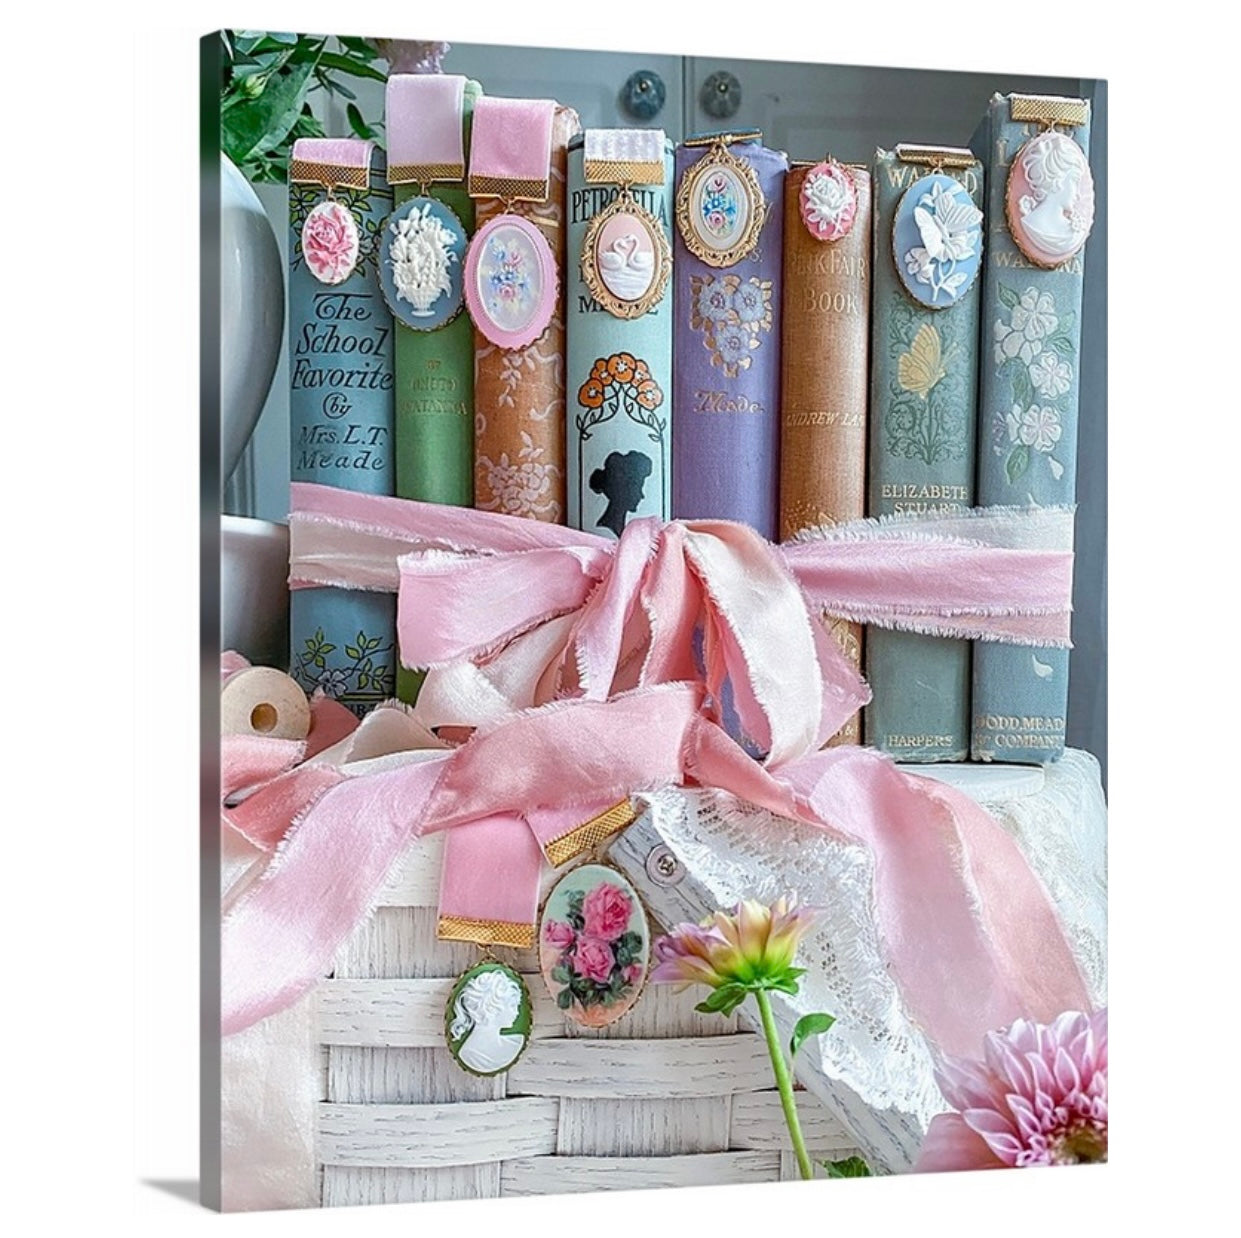 Pastel Vintage Books Gallery Wrapped Canvas